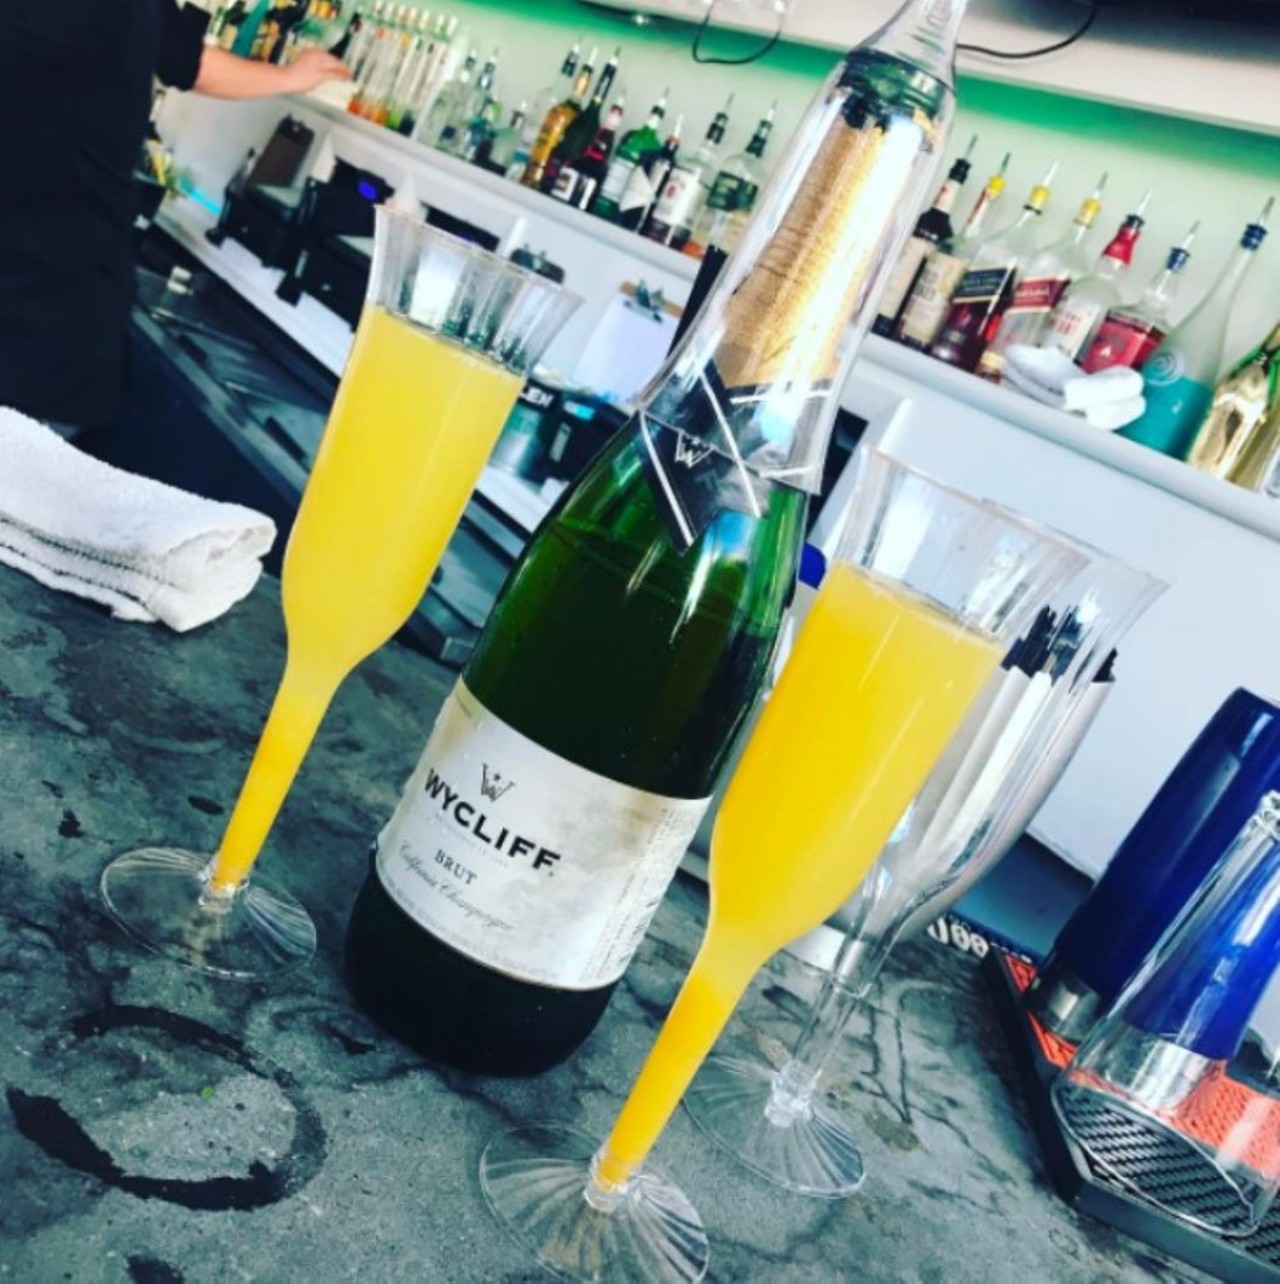 Aero
What to Drink: Mimosas
Photo via msbutterfly/Instagram